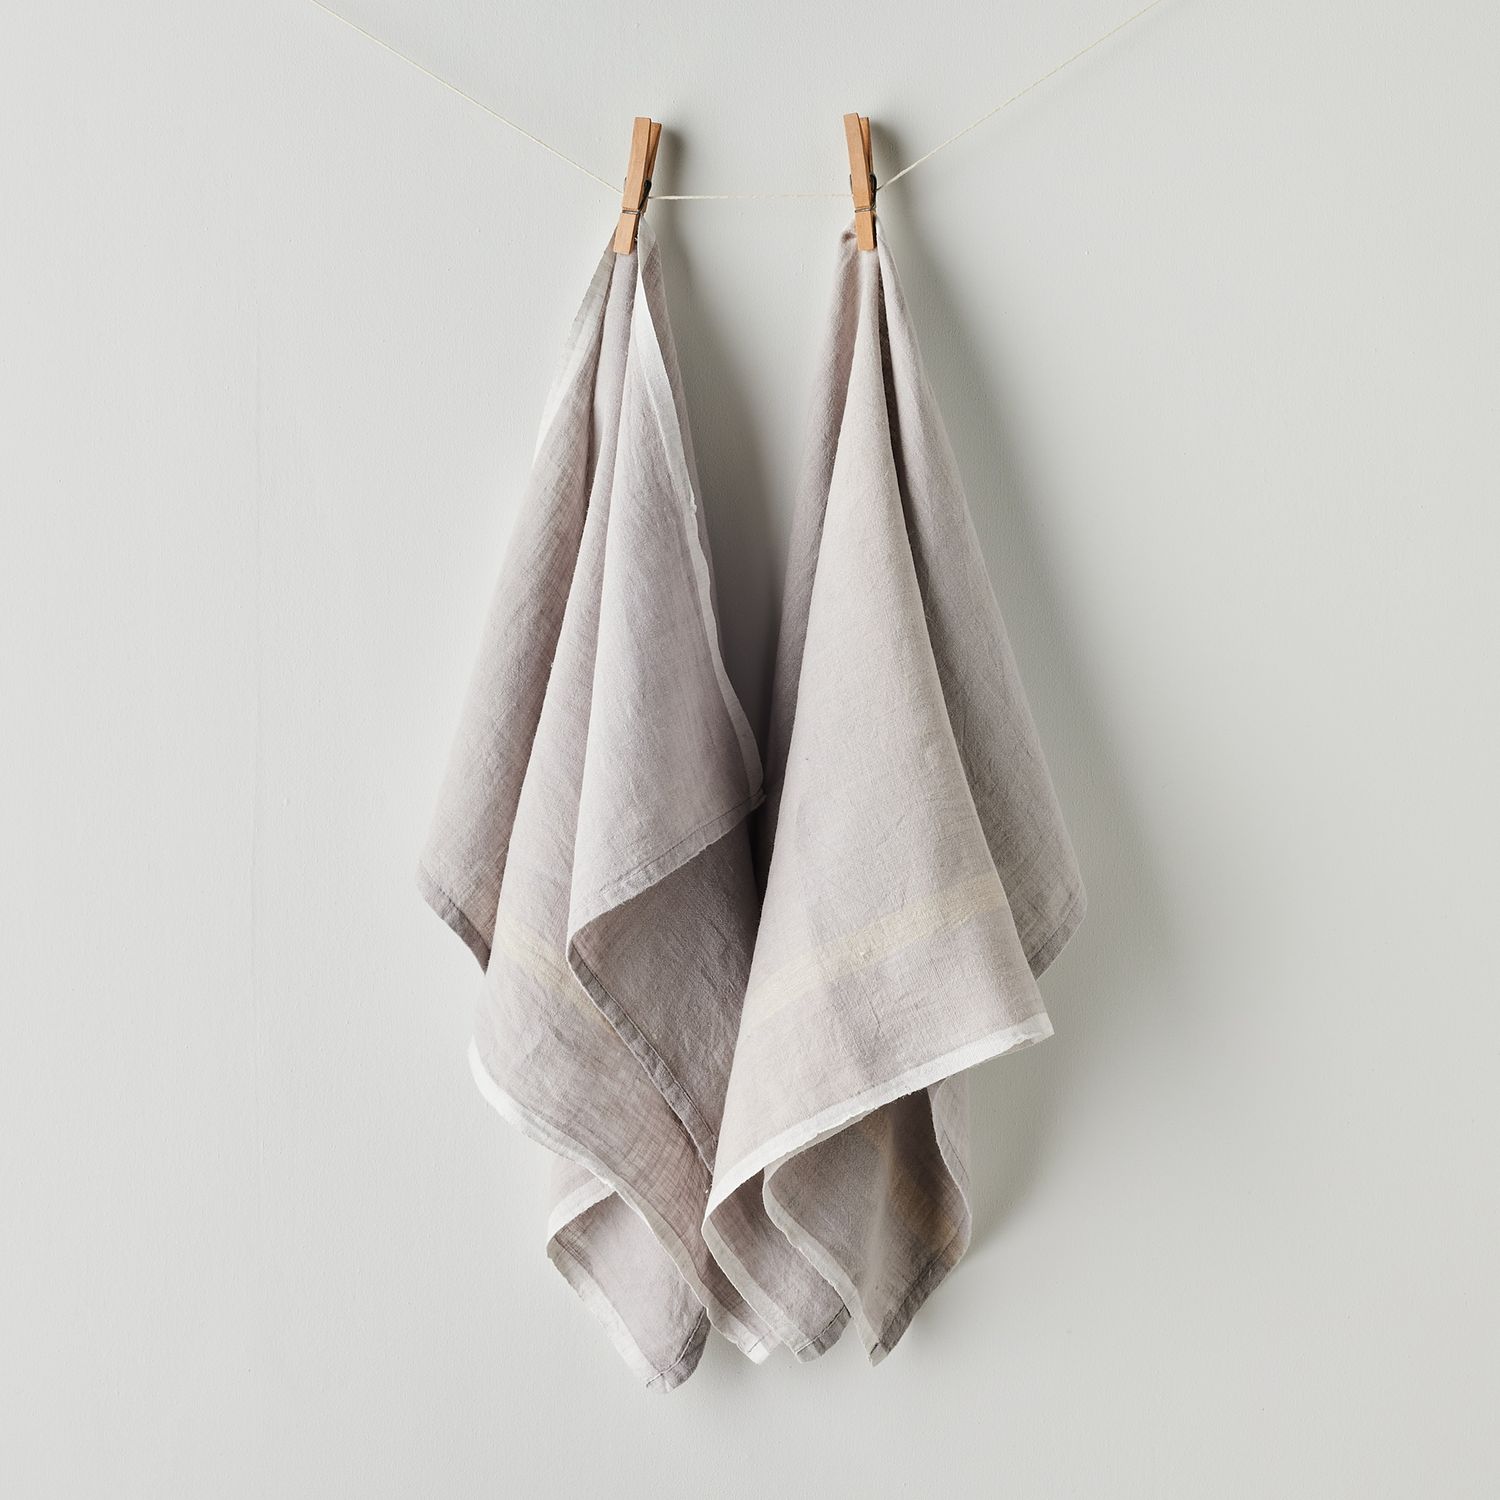 Set of 2 Linen Tea Towels in Various Colors. Washed Linen Kitchen